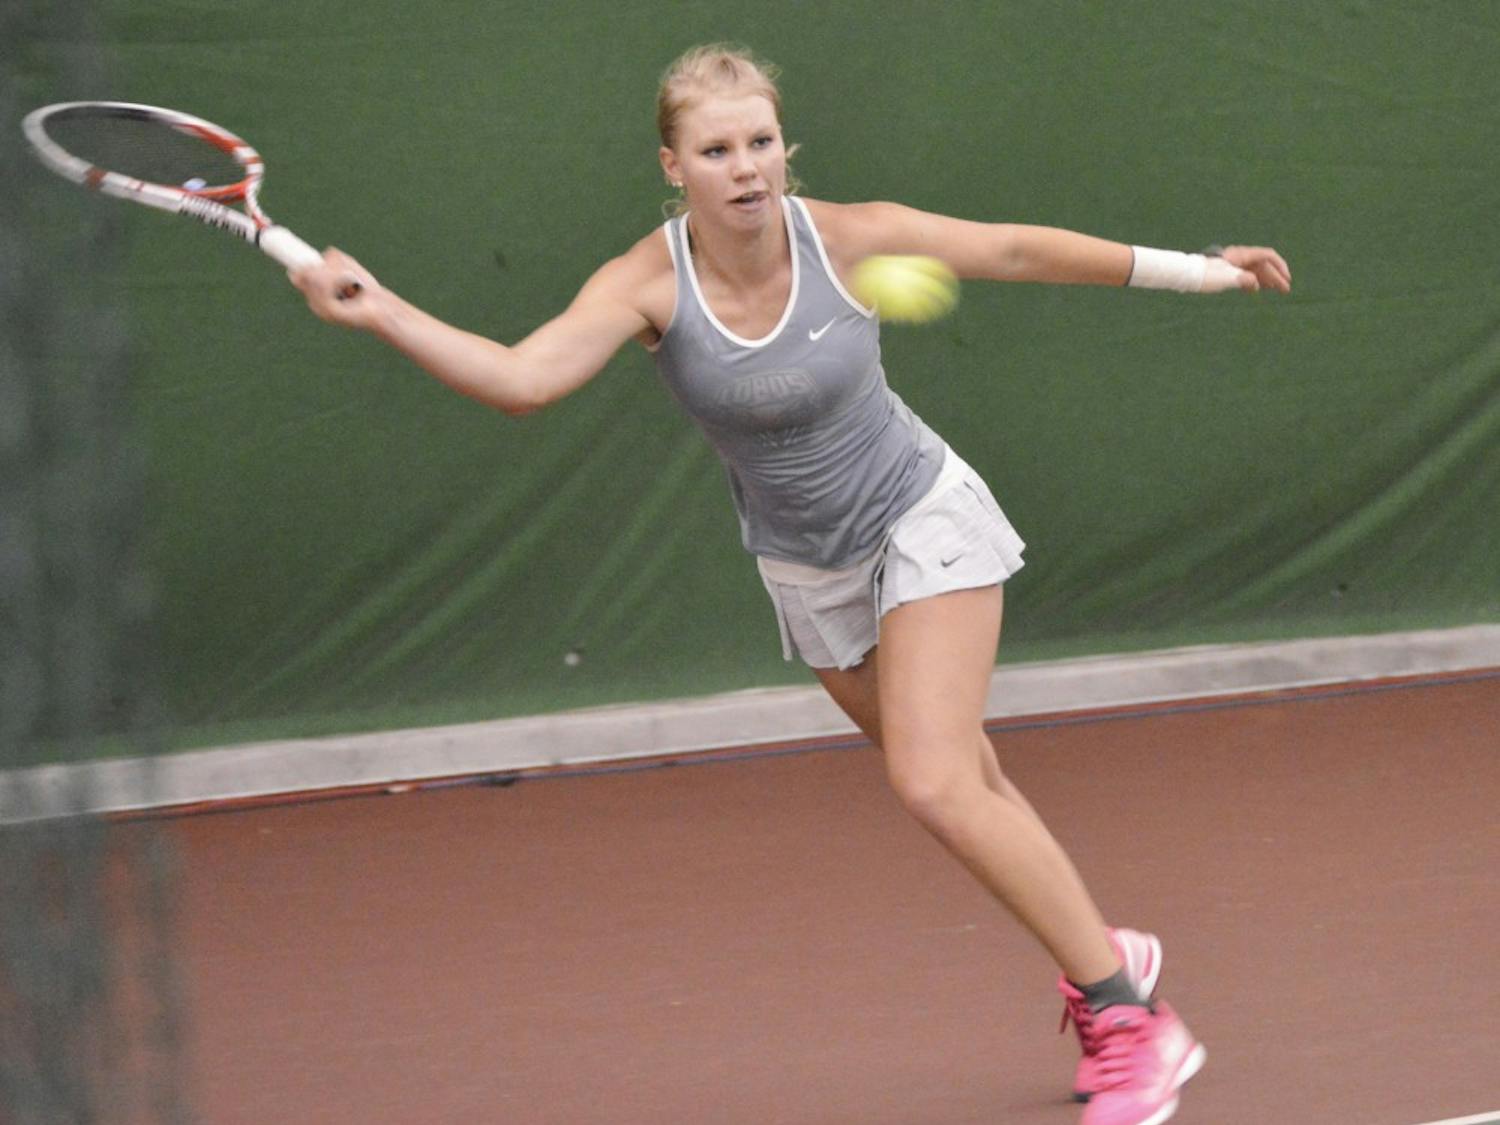 UNM sophomore Dominique Dulski plays against Wyoming on Sunday afternoon at Linda Estes Tennis Complex for the Mountain West Women?s Championships.